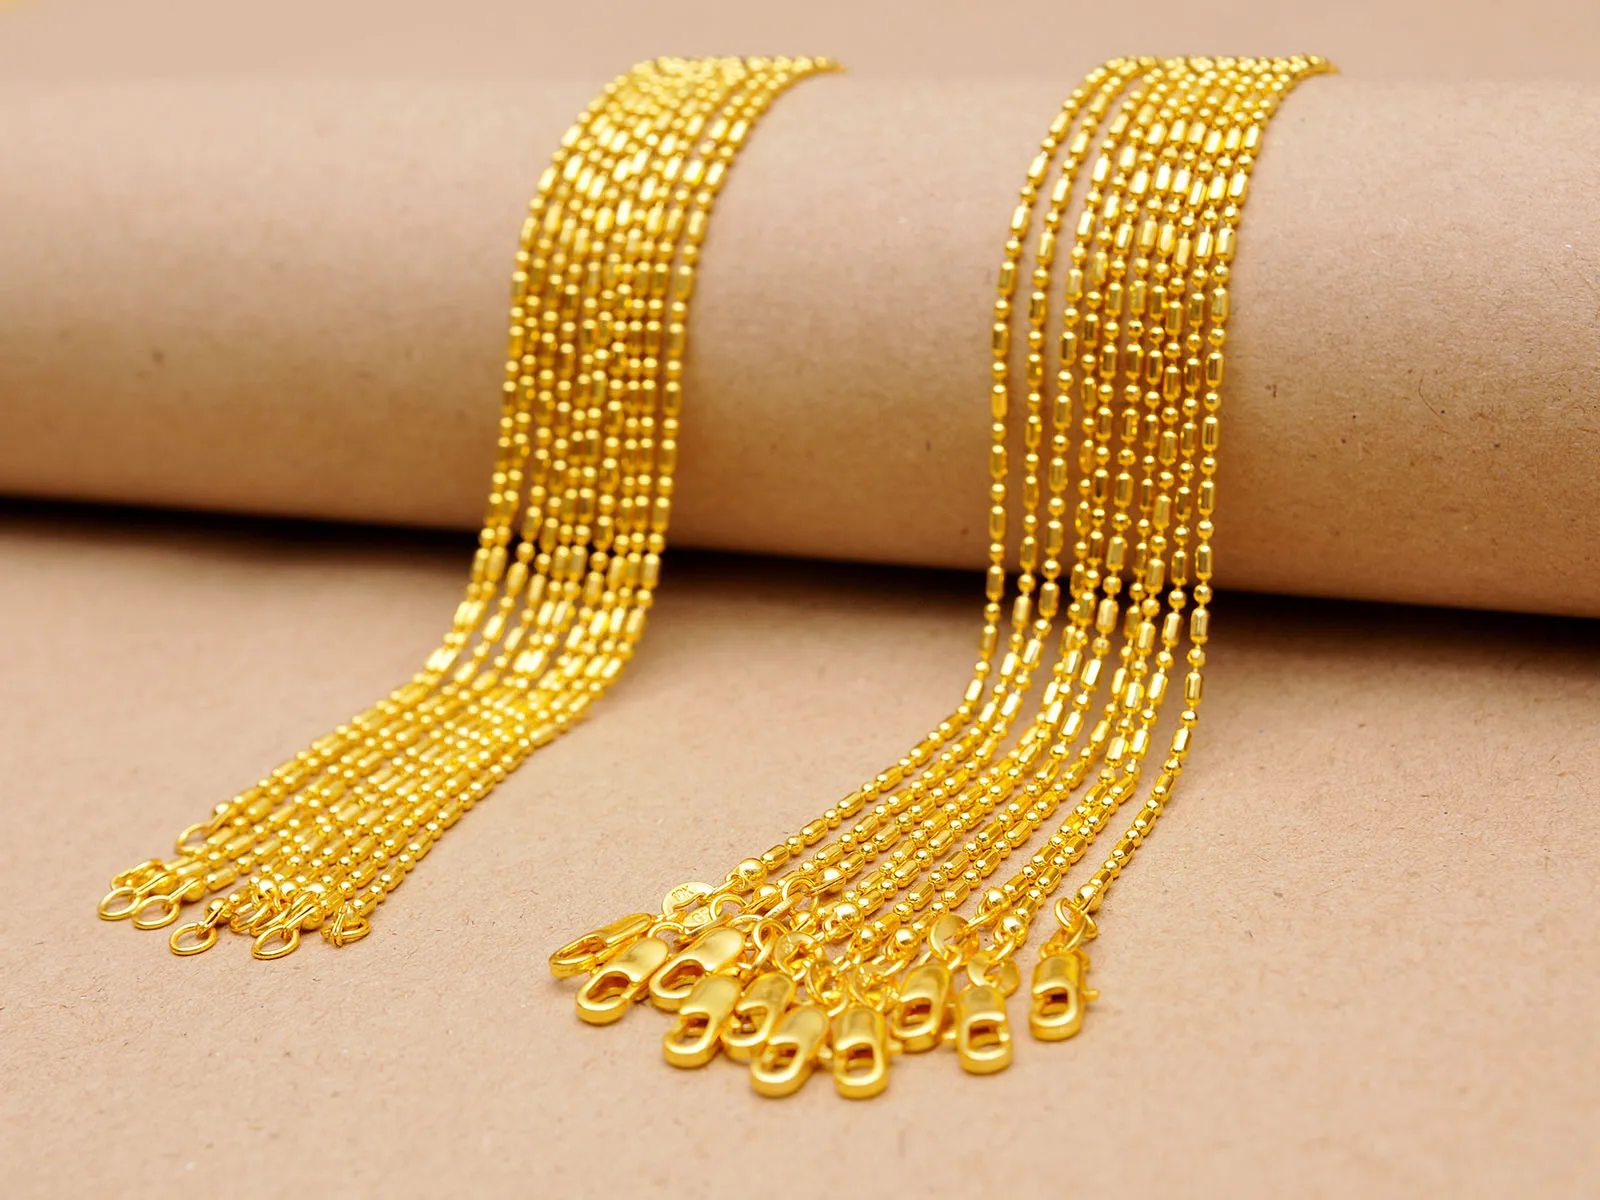 

5PCS Women's High Jewelry 1.2MM 18 K Gold Column Ball Chain Necklace Charm Gold Necklace 16" 18" 20" 22" 24" 26" 28" 30" inches